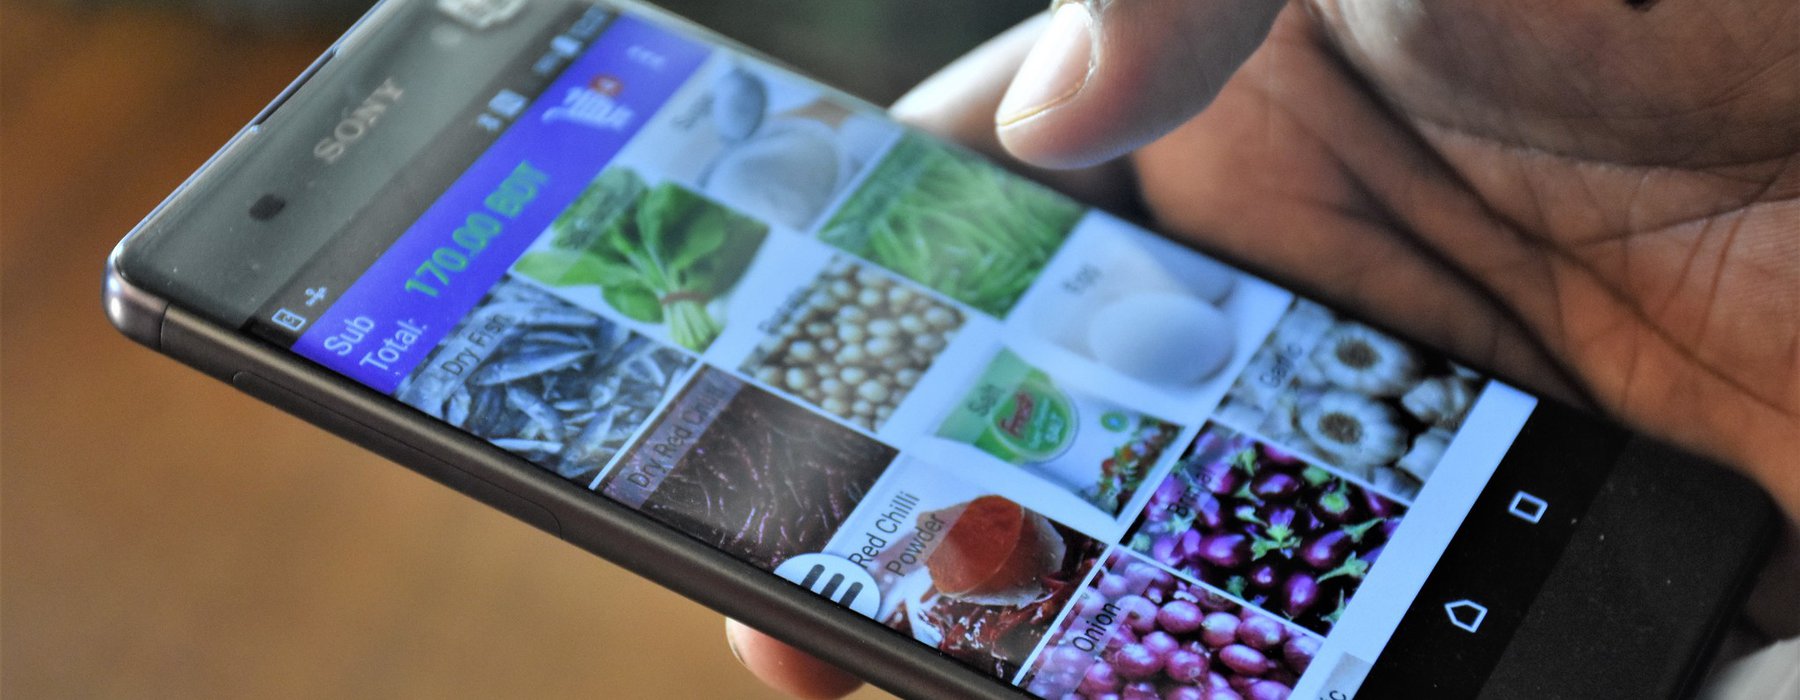 A picture of a mobile phone in a hand with photos of vegetables on the screen